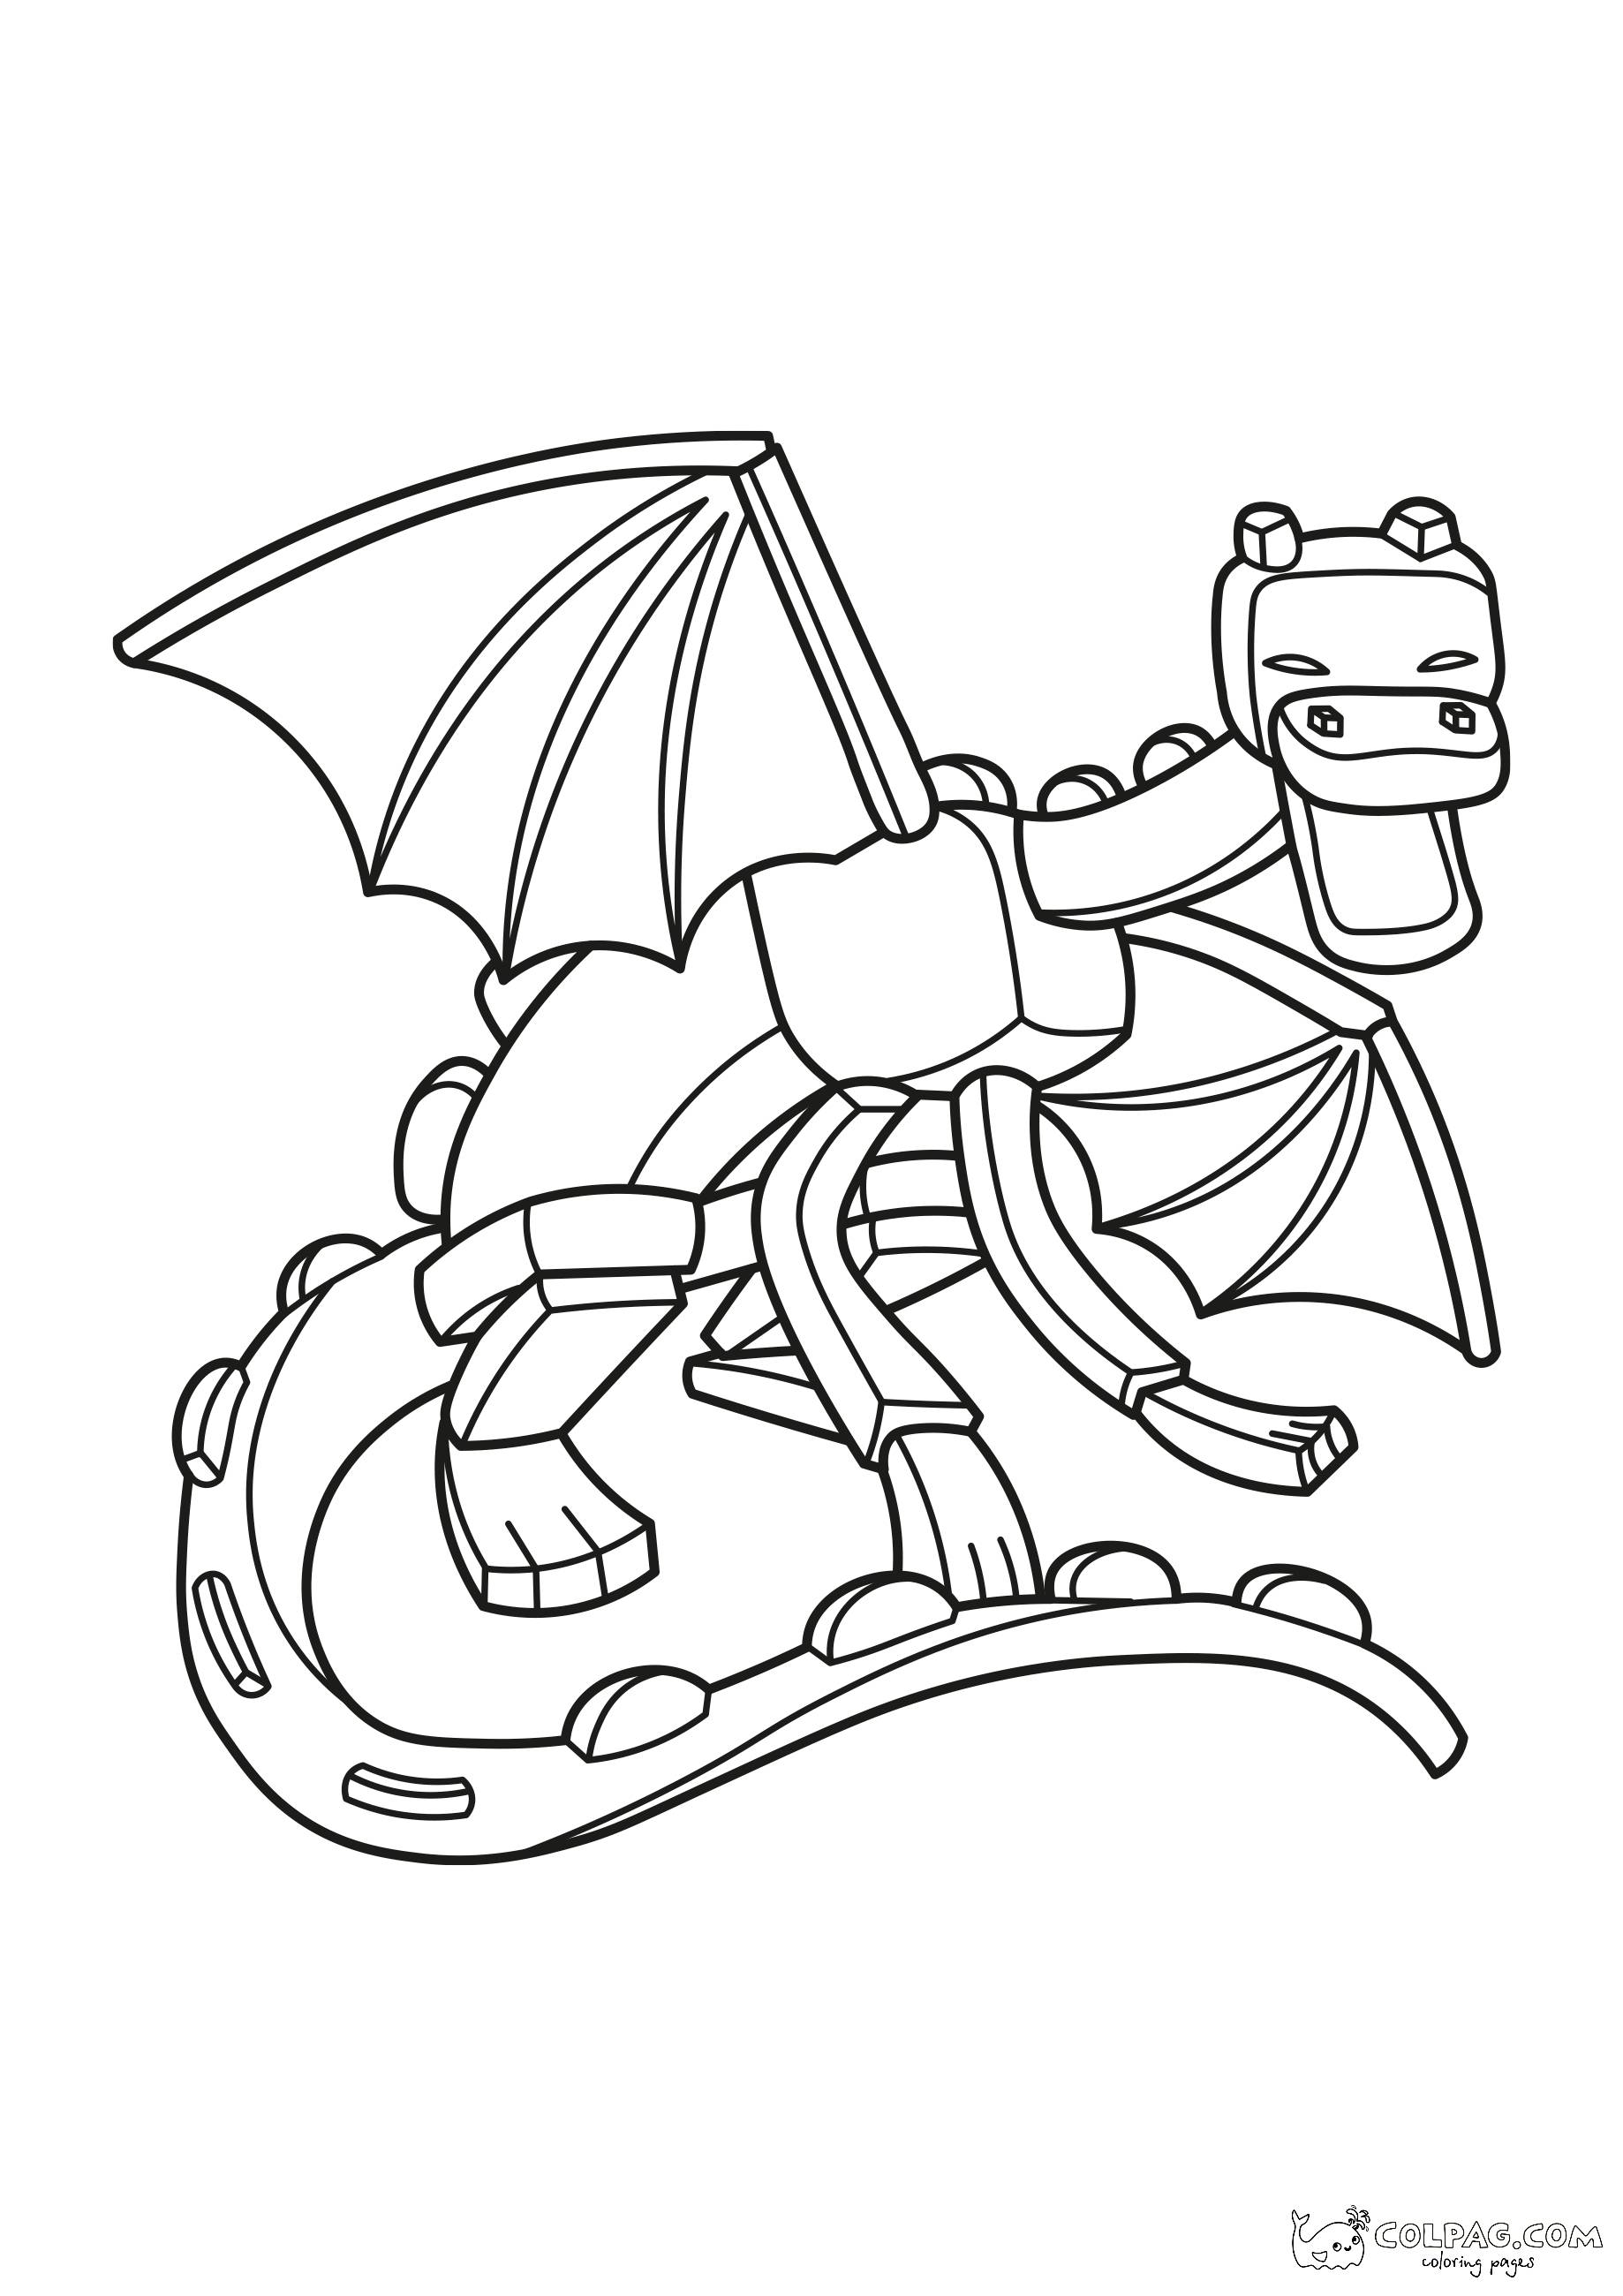 ender-dragon-2-minecraft-coloring-page-colpag